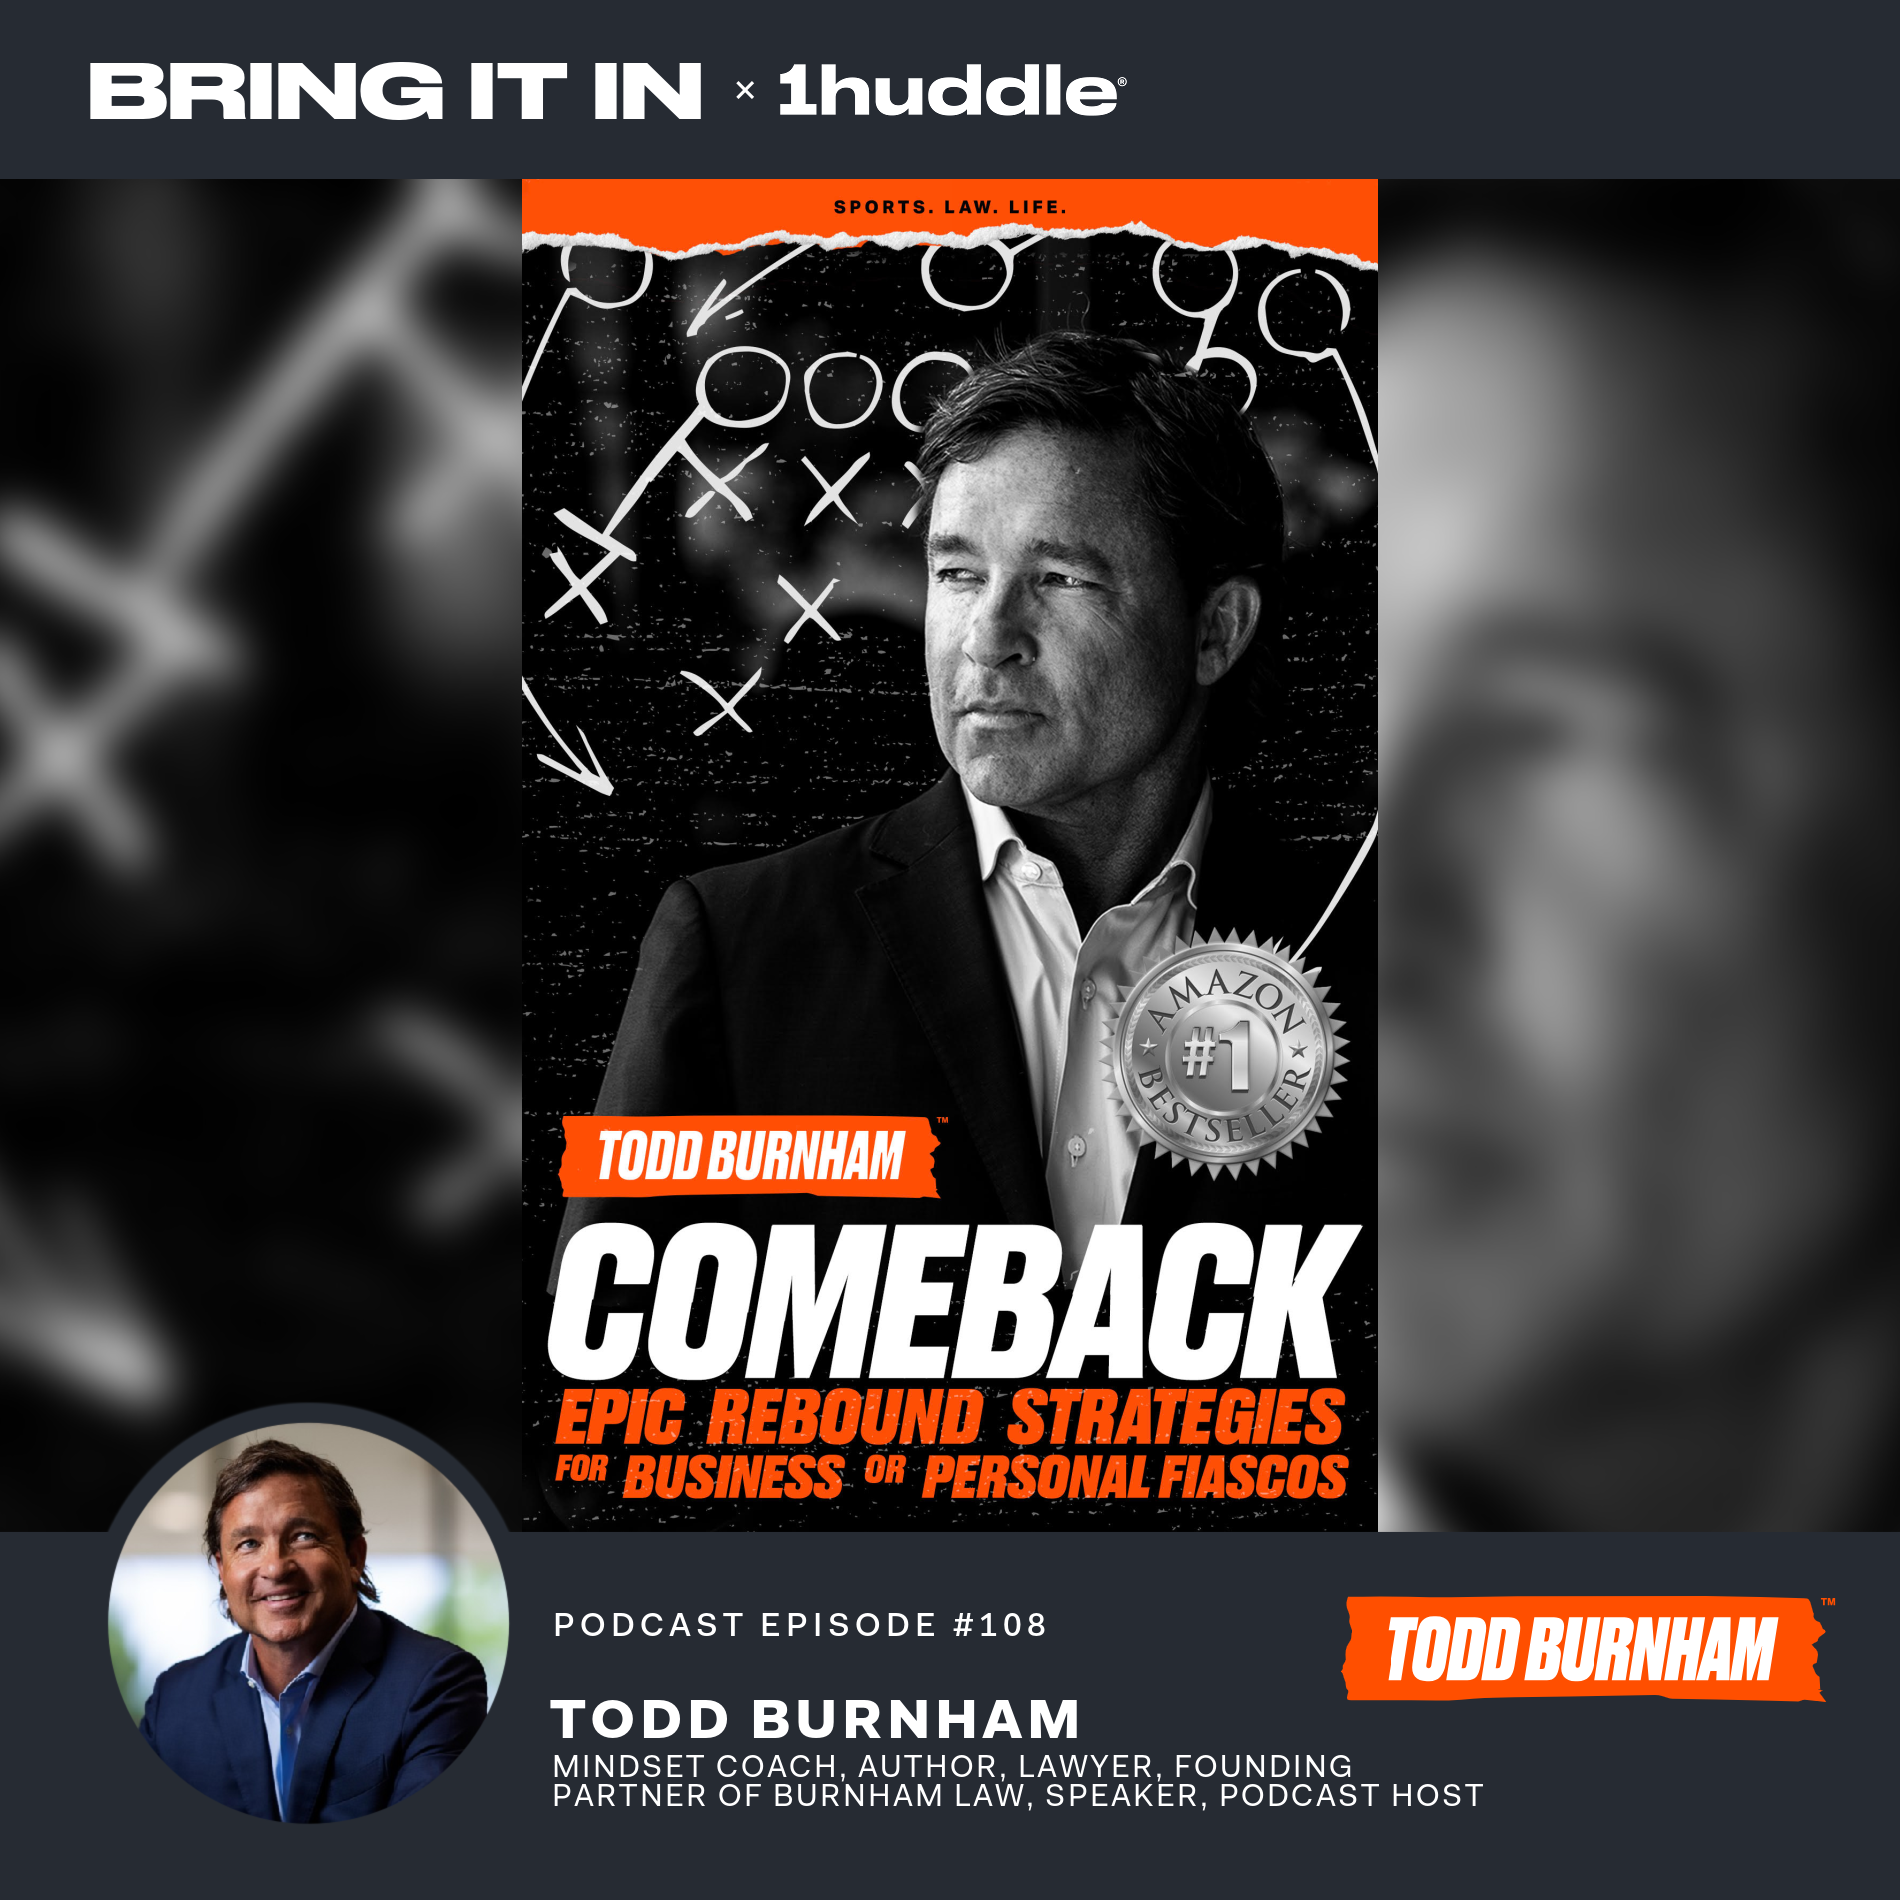 Author of “Comeback: Epic Rebound Strategies for Personal or Business Adversity”